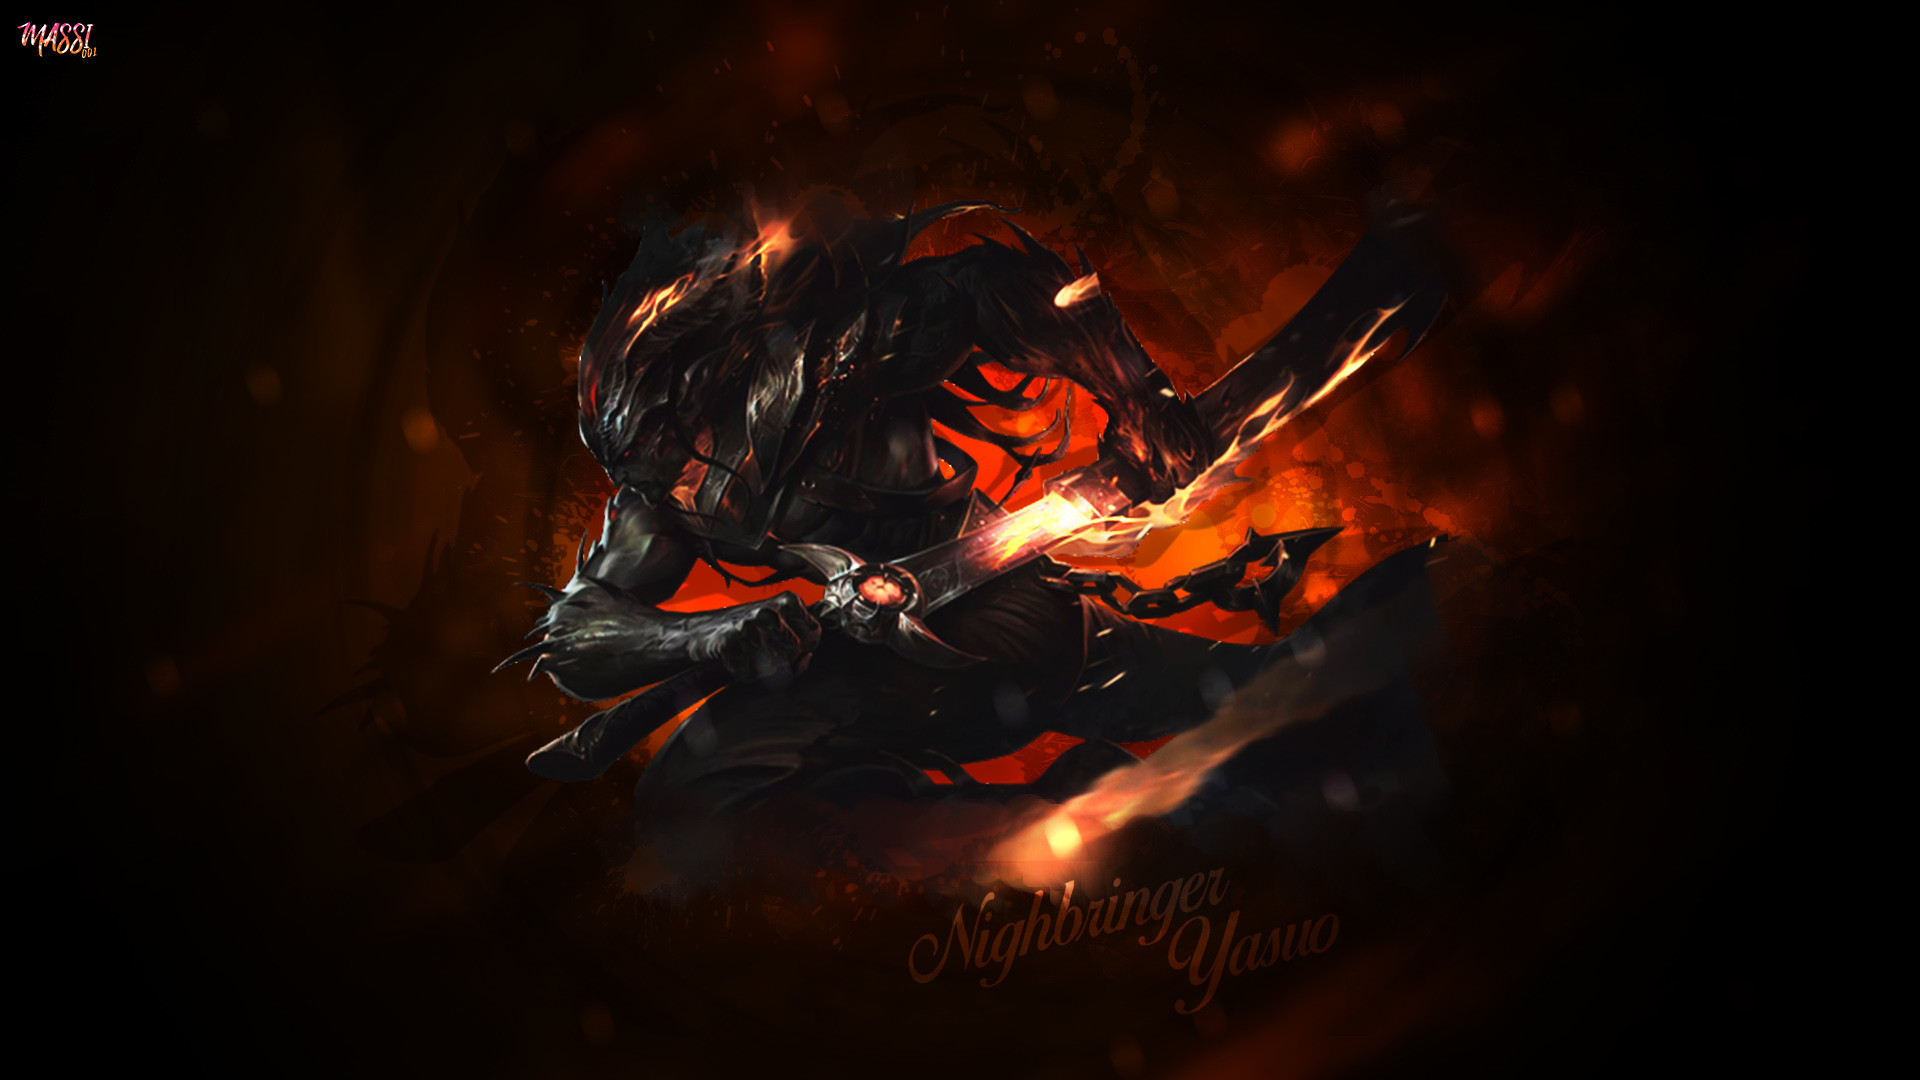 1920x1080 Nightbringer Yasuo by Massi001 HD Wallpaper Background Official Artwork  League of Legends lol